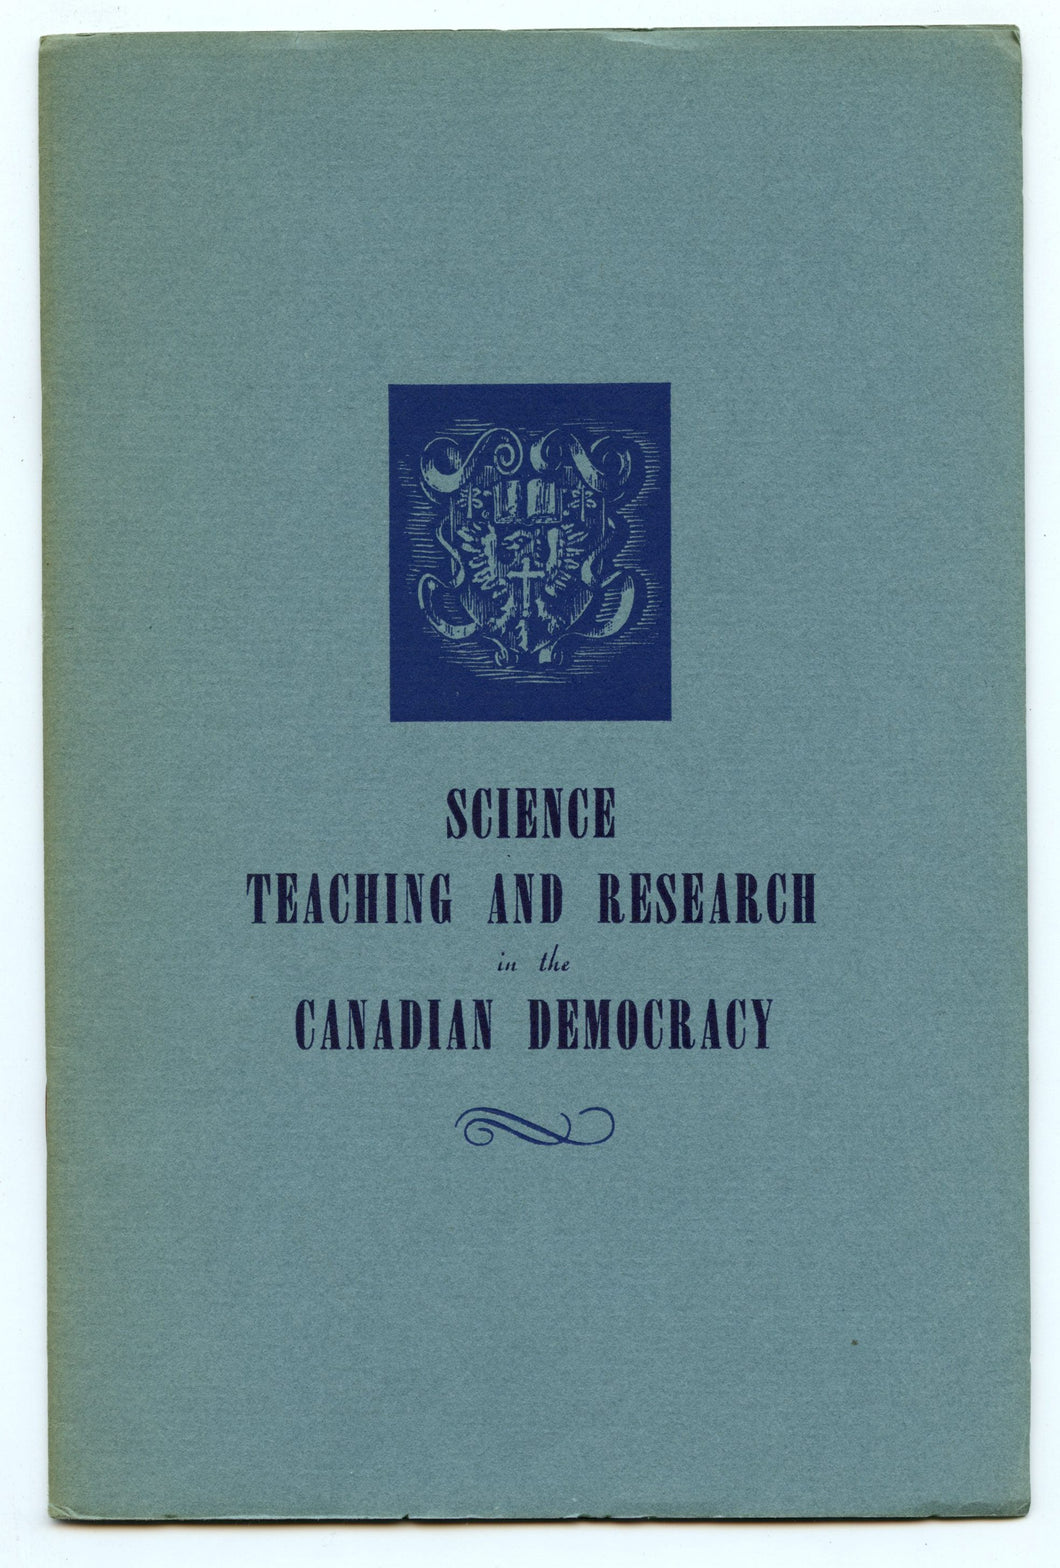 Science, Teaching and Research in the Canadian Democracy